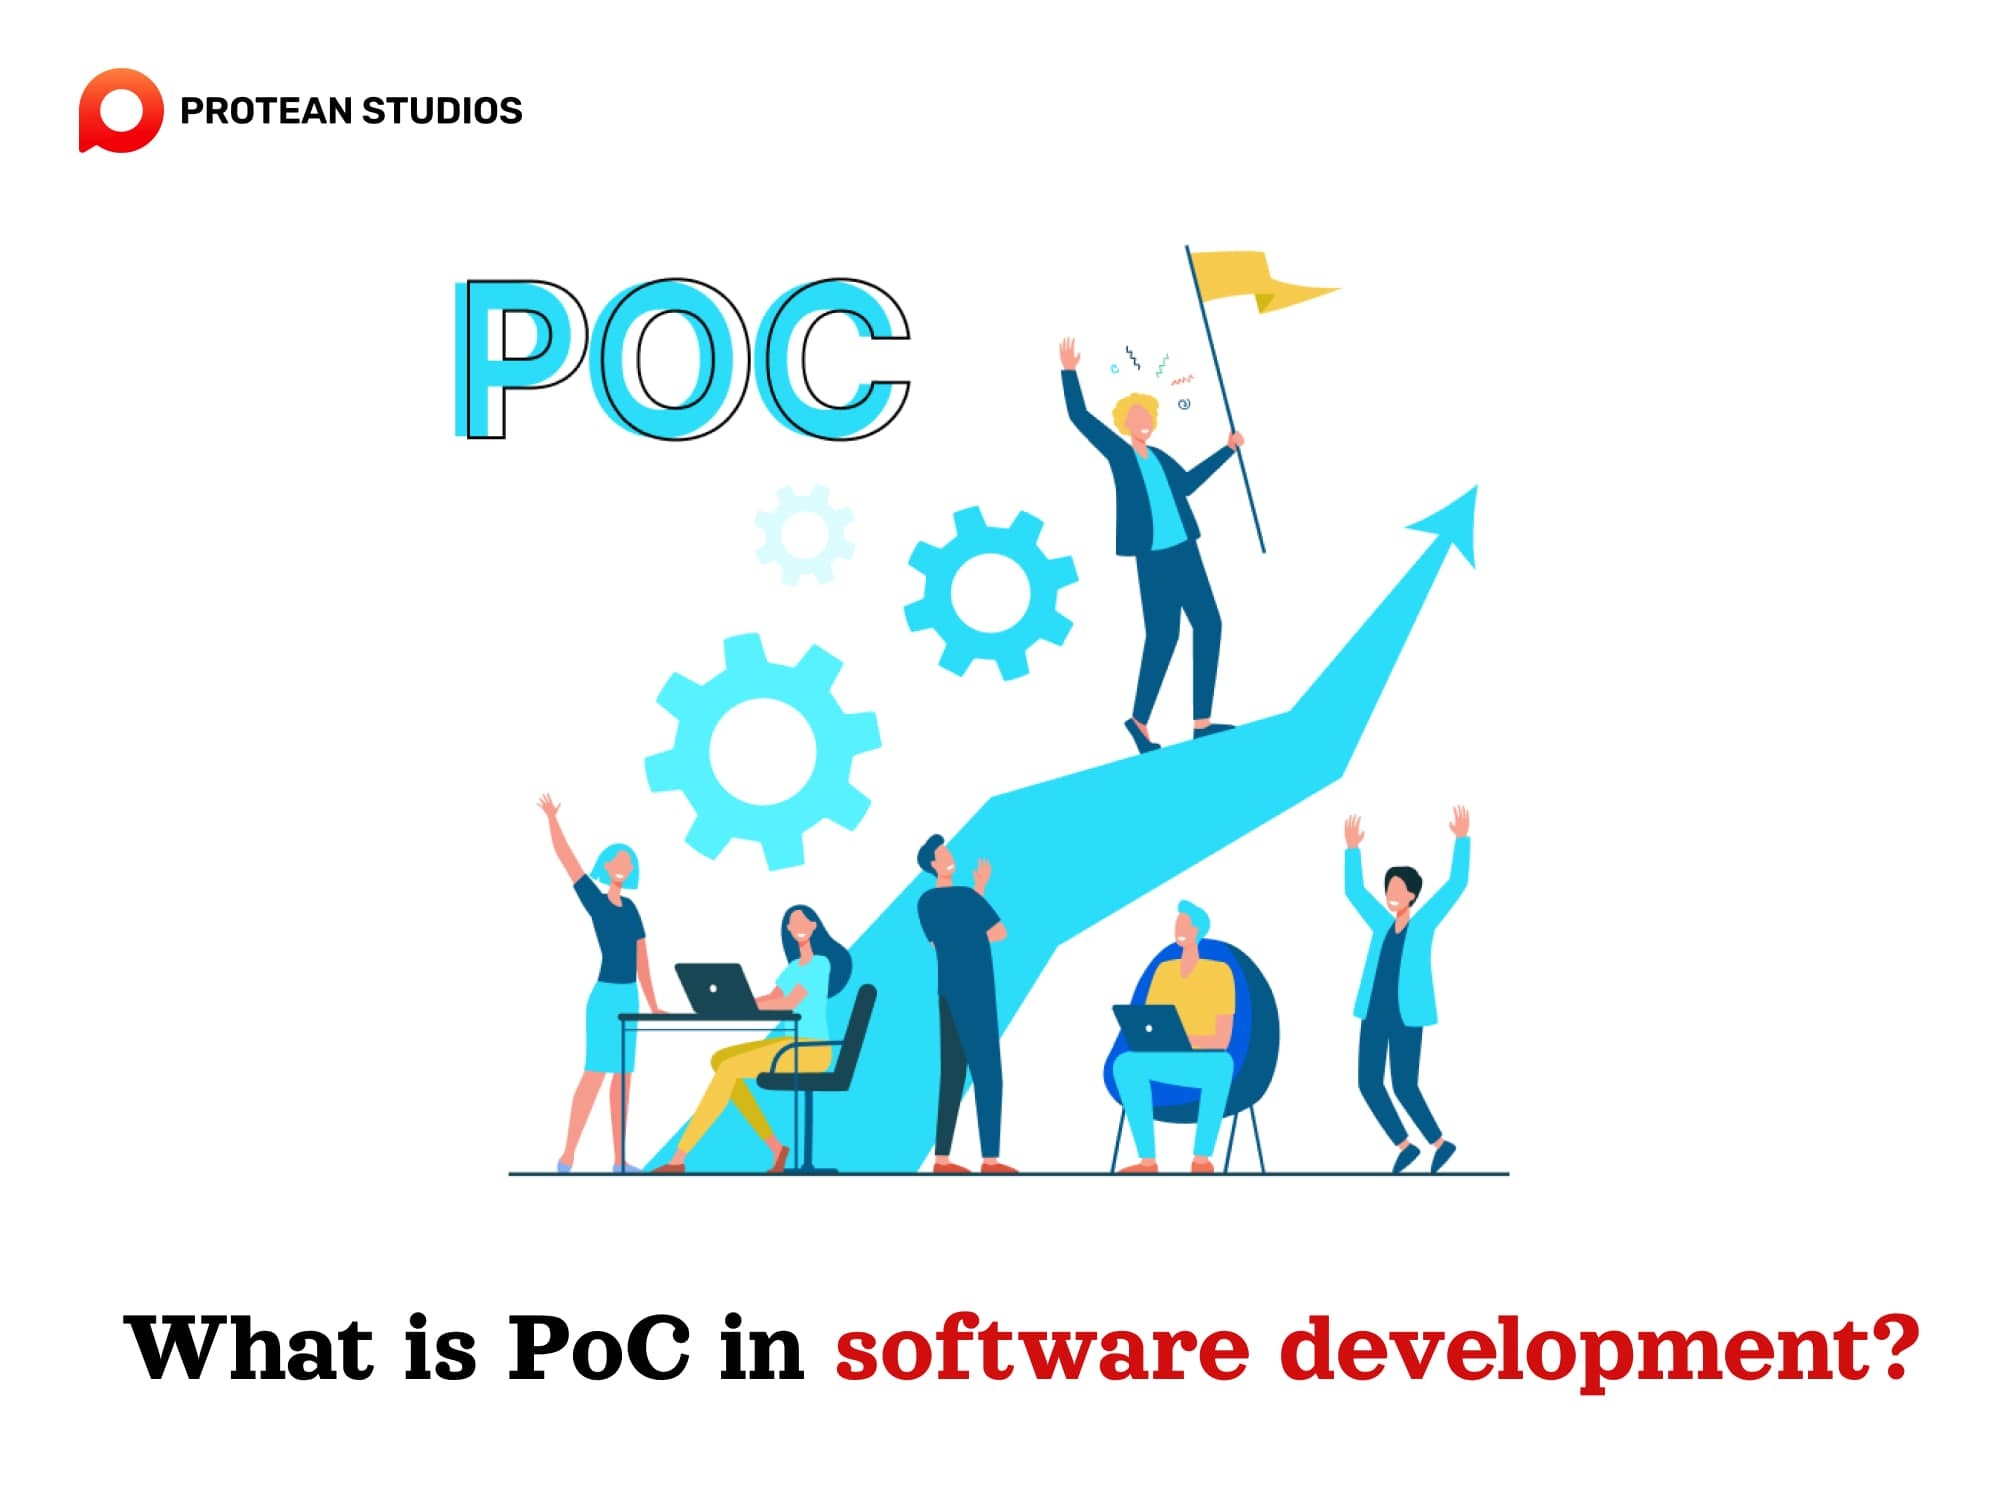 Definition and features of proof-of-concept when developing software